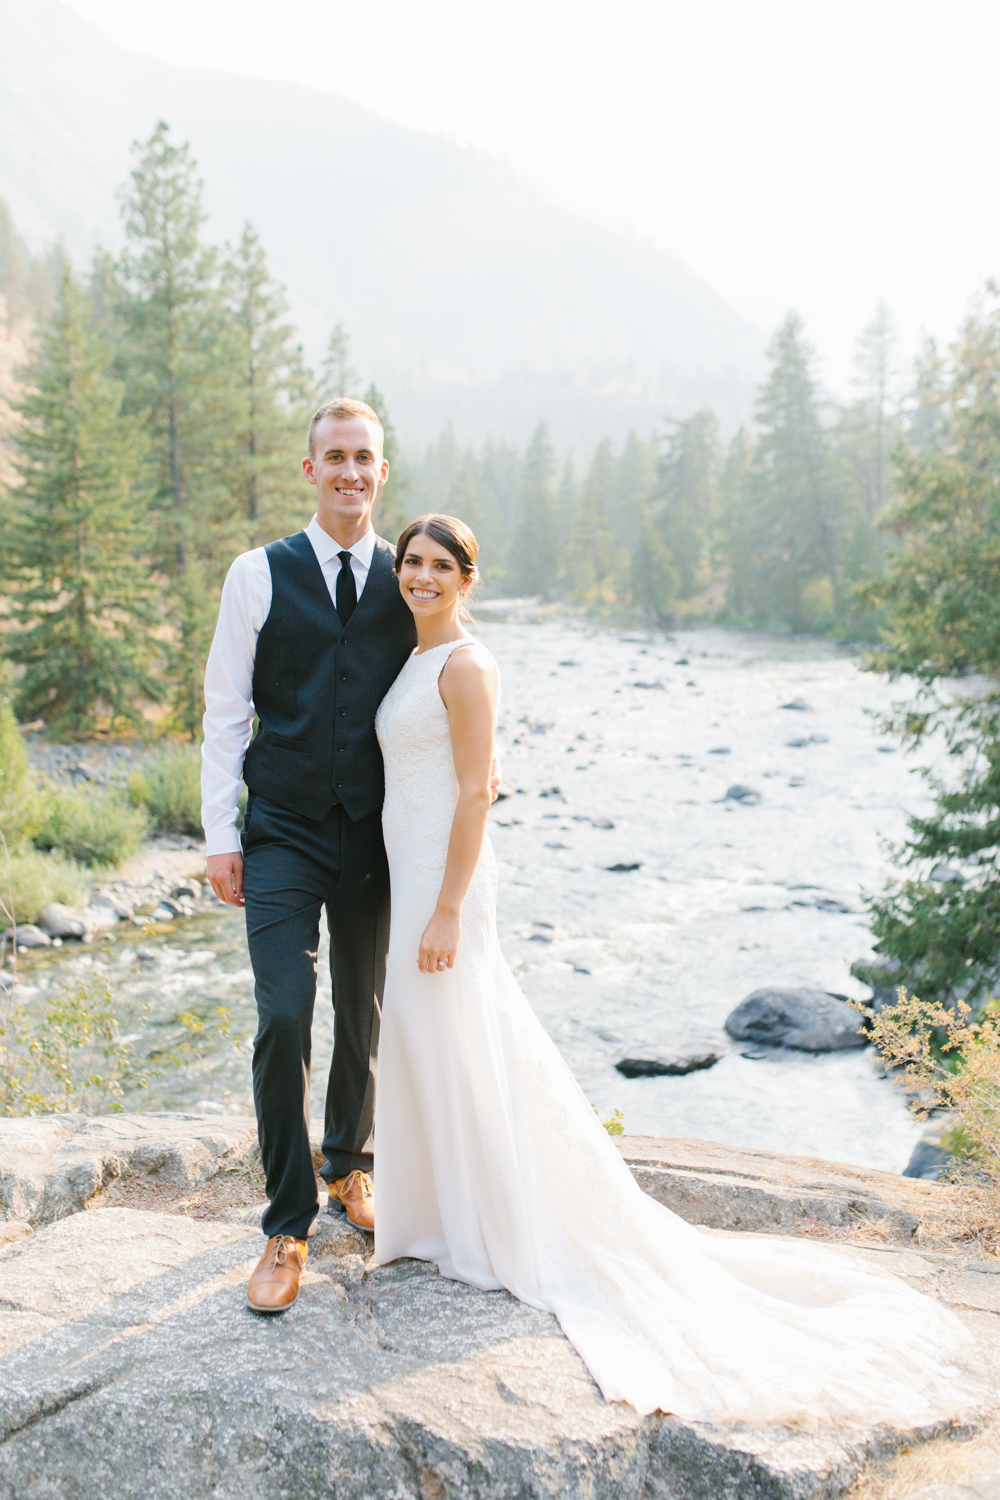 Grey and White Wedding in the Mountains of Leavenworth, Washington | Sleeping Lady | Classic and Timeless Wedding | VSCO | Stunning Mountain Top Bride and Groom Portraits on the Icicle River.jpg-3301.jpg